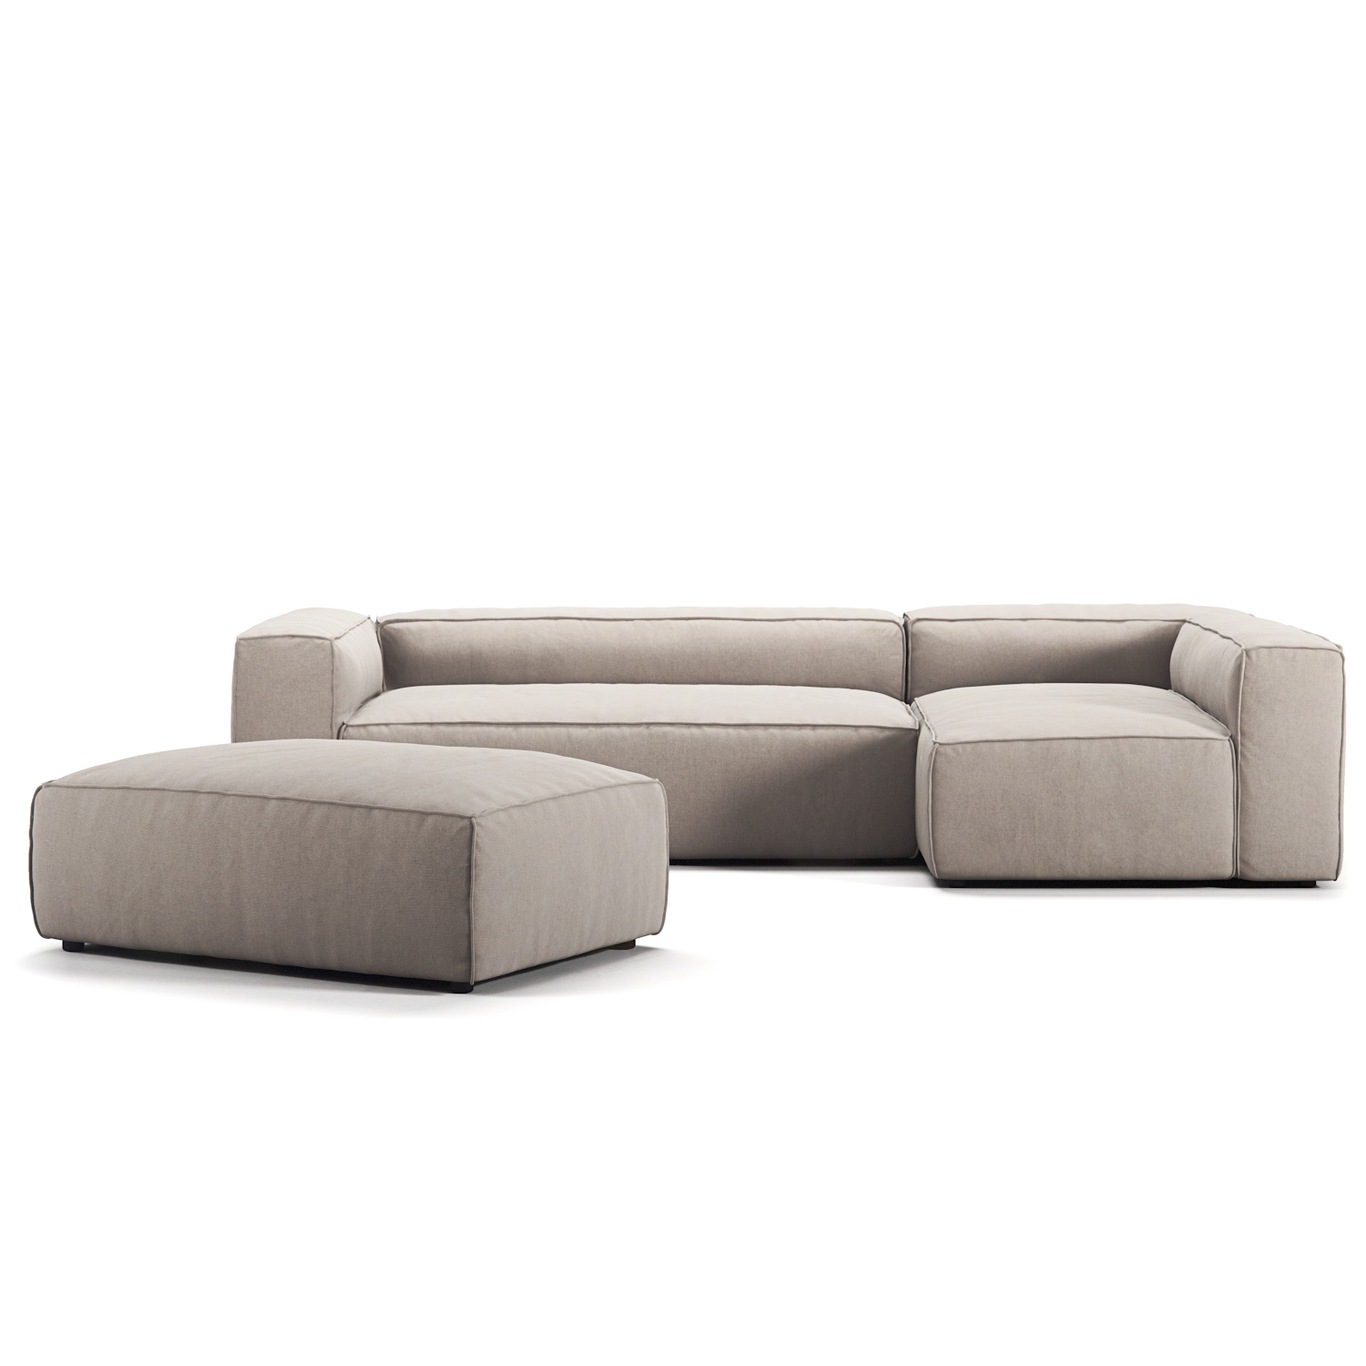 Grand 4 Seater Sofa Divan Right open end Piece With Footstool, Sandshell Beige